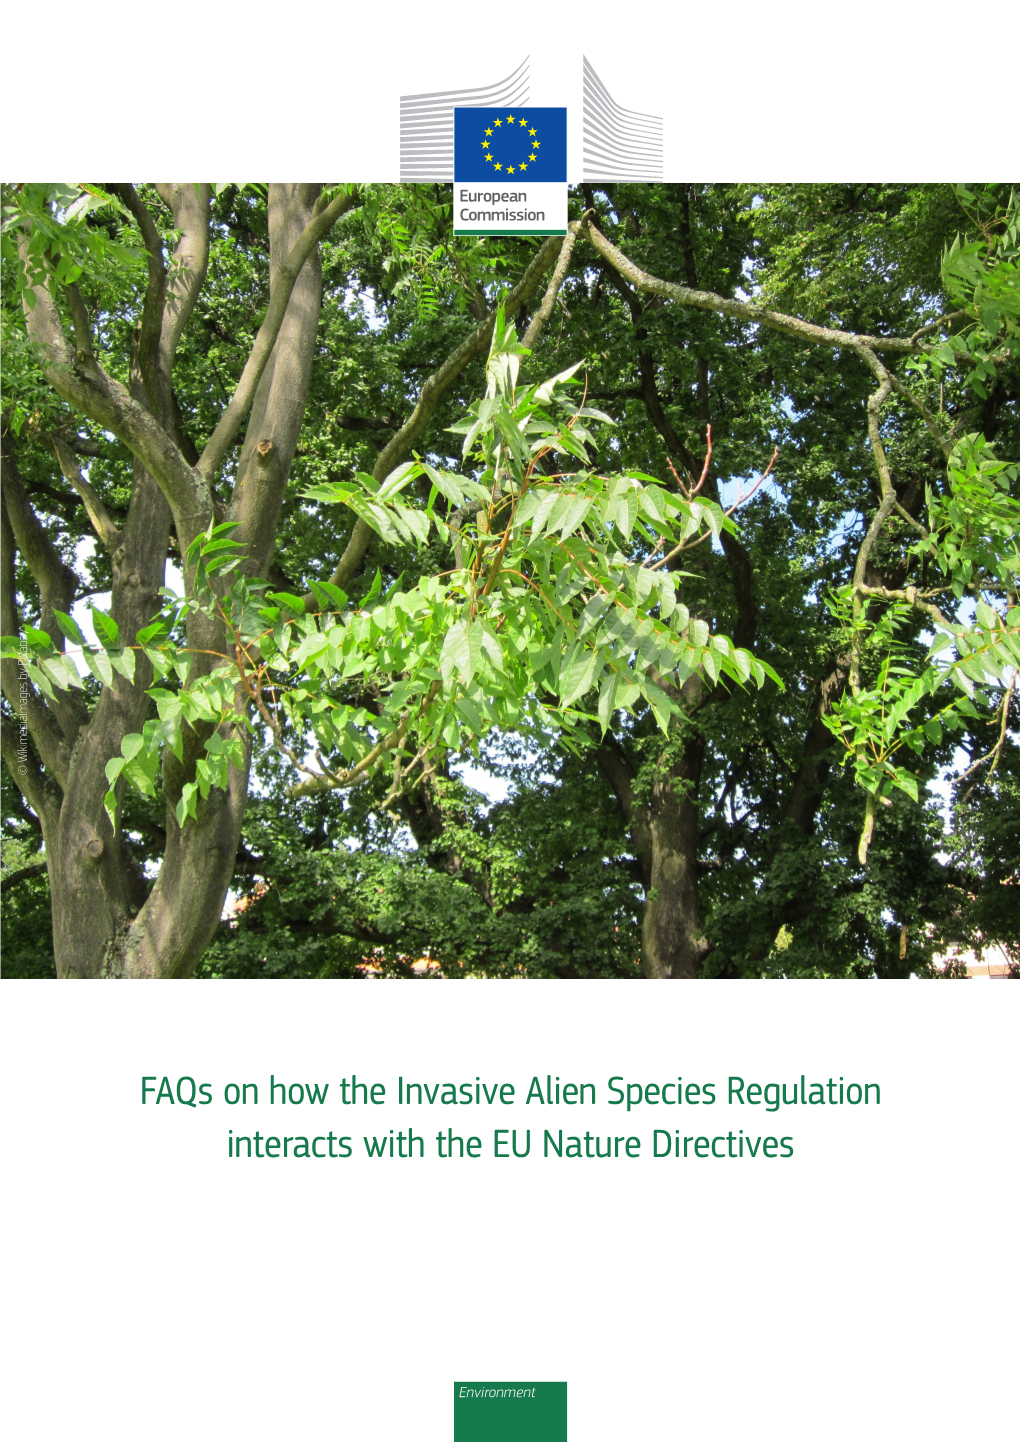 Faqs on How the Invasive Alien Species Regulation Interacts with the EU Nature Directives